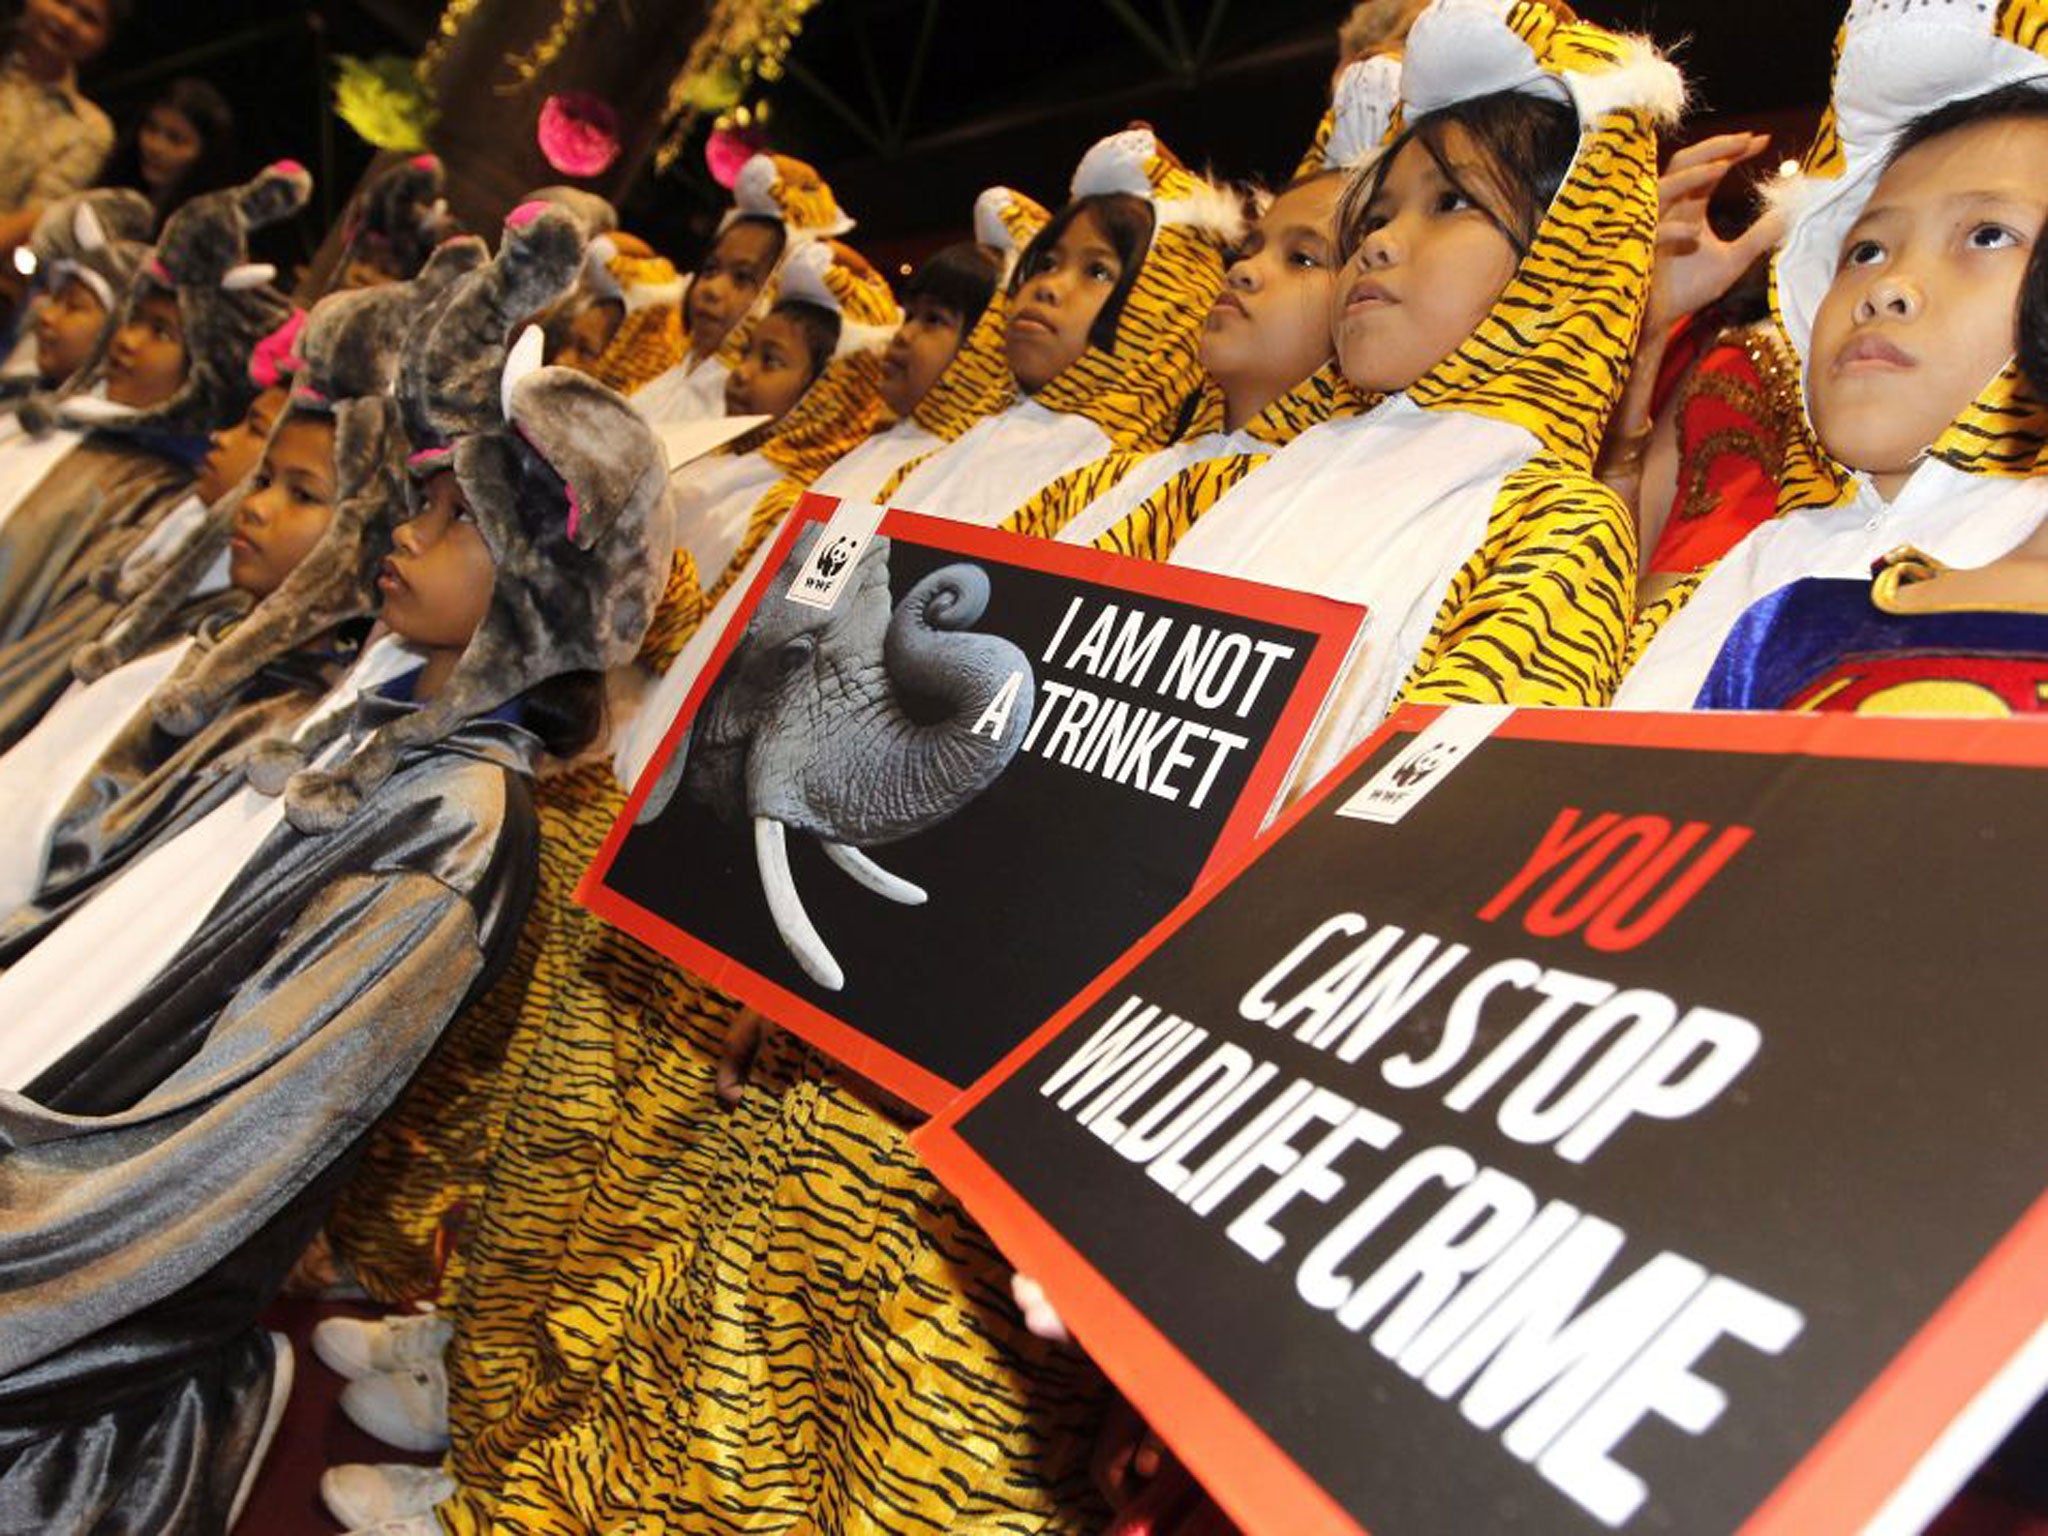 Thai children dressed as elephants and tigers at the Cites conference in Bangkok